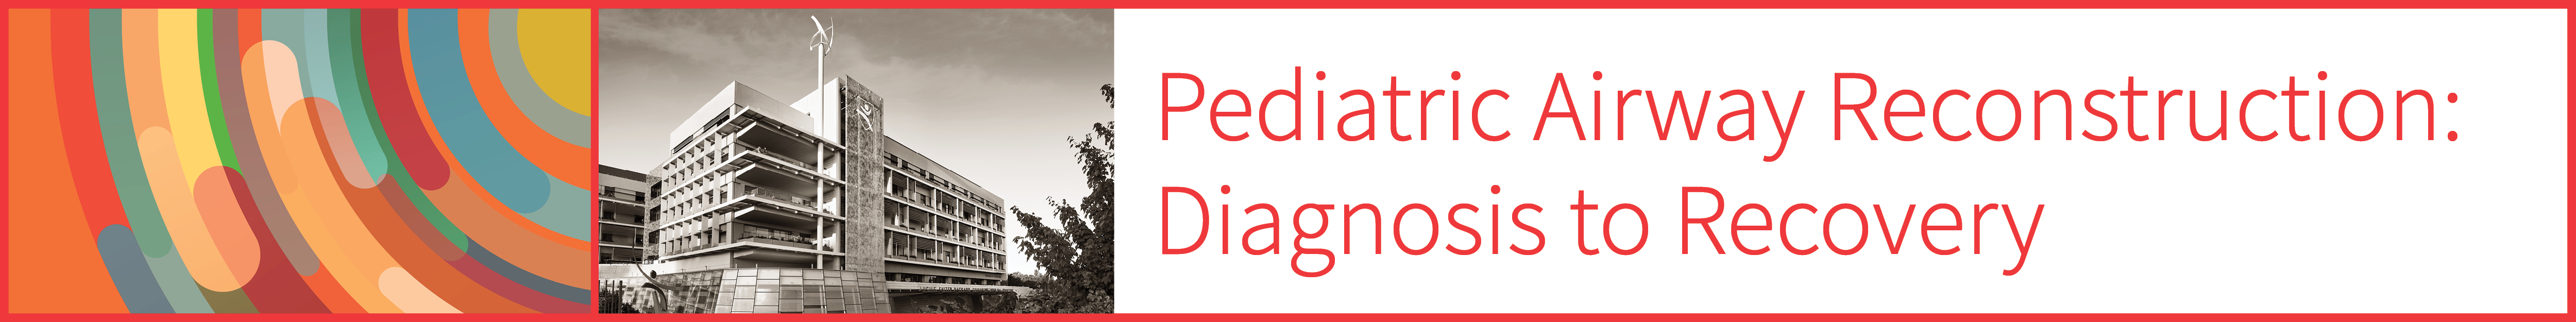 Pediatric Airway Reconstruction: Diagnosis to Recovery Recording Banner